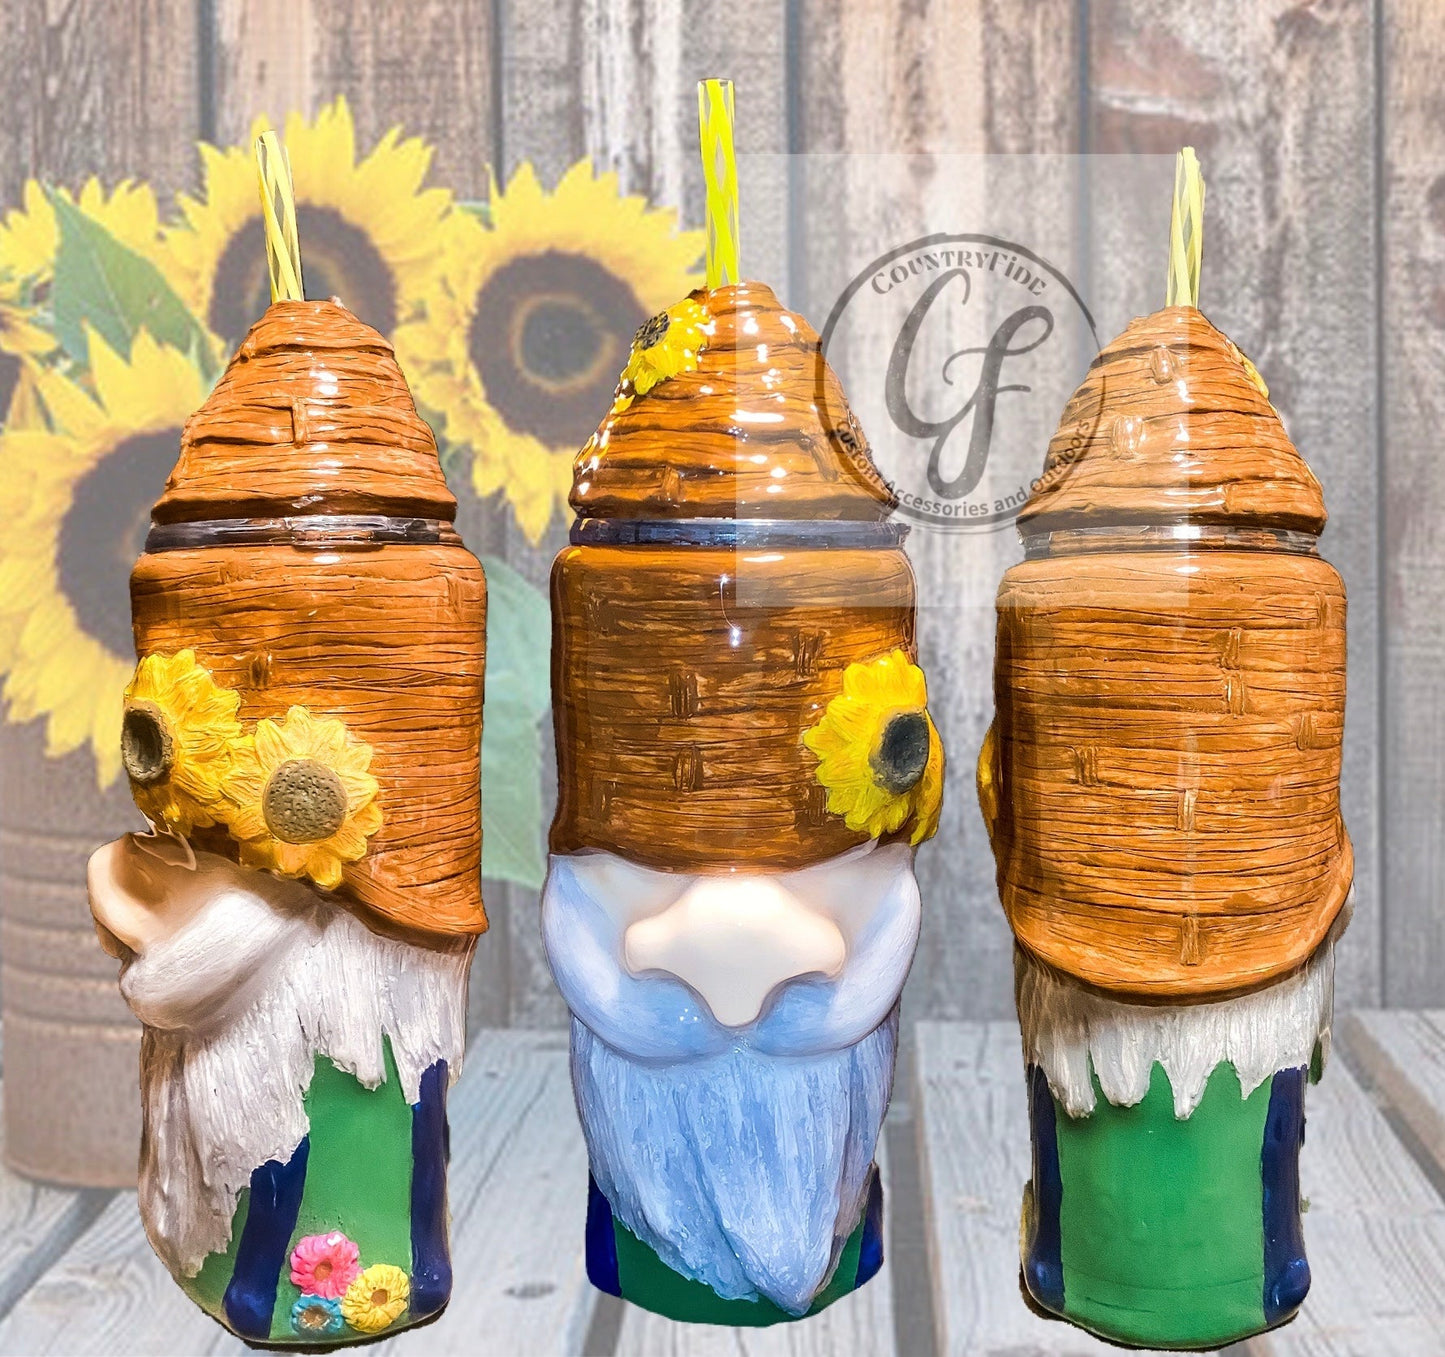 Sunflower Gnome 3D - CountryFide Custom Accessories and Outdoors